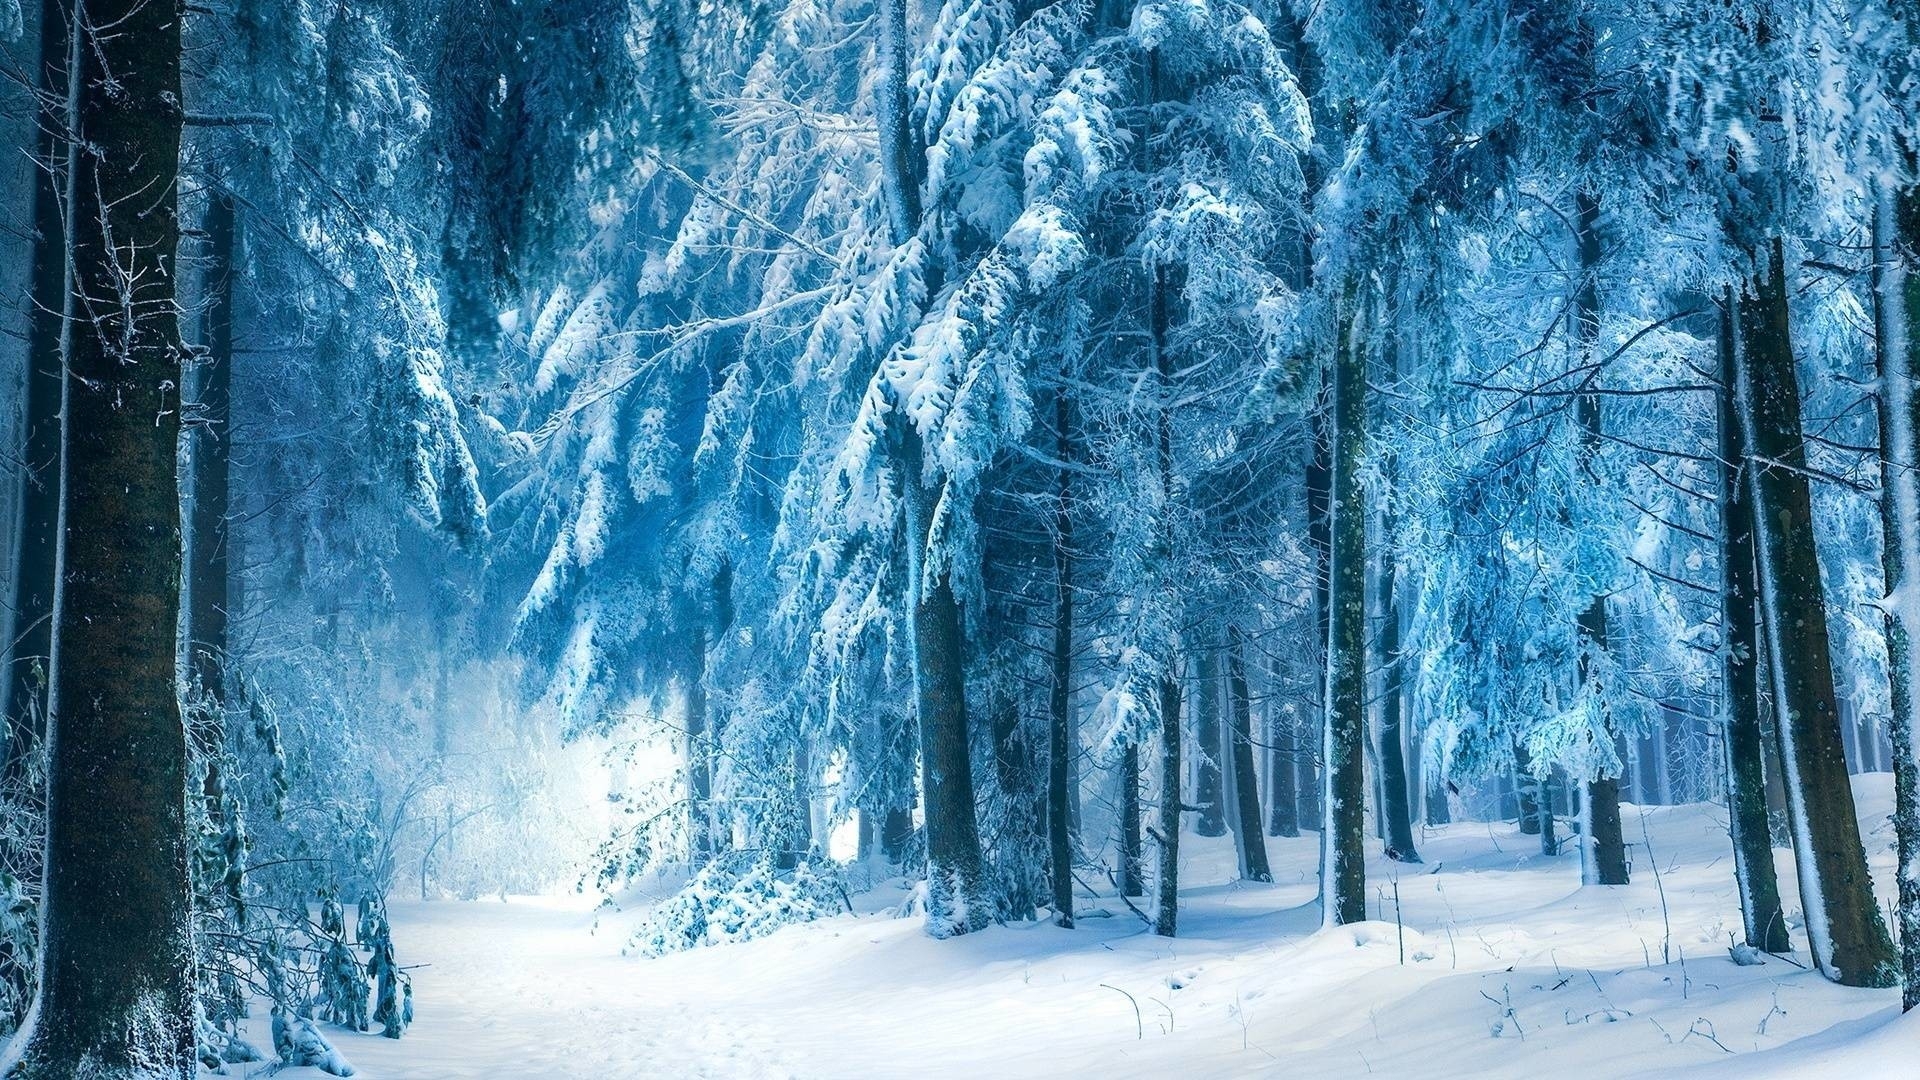 10 Best Snowy Dark Forest Wallpaper FULL HD 1080p For PC Background